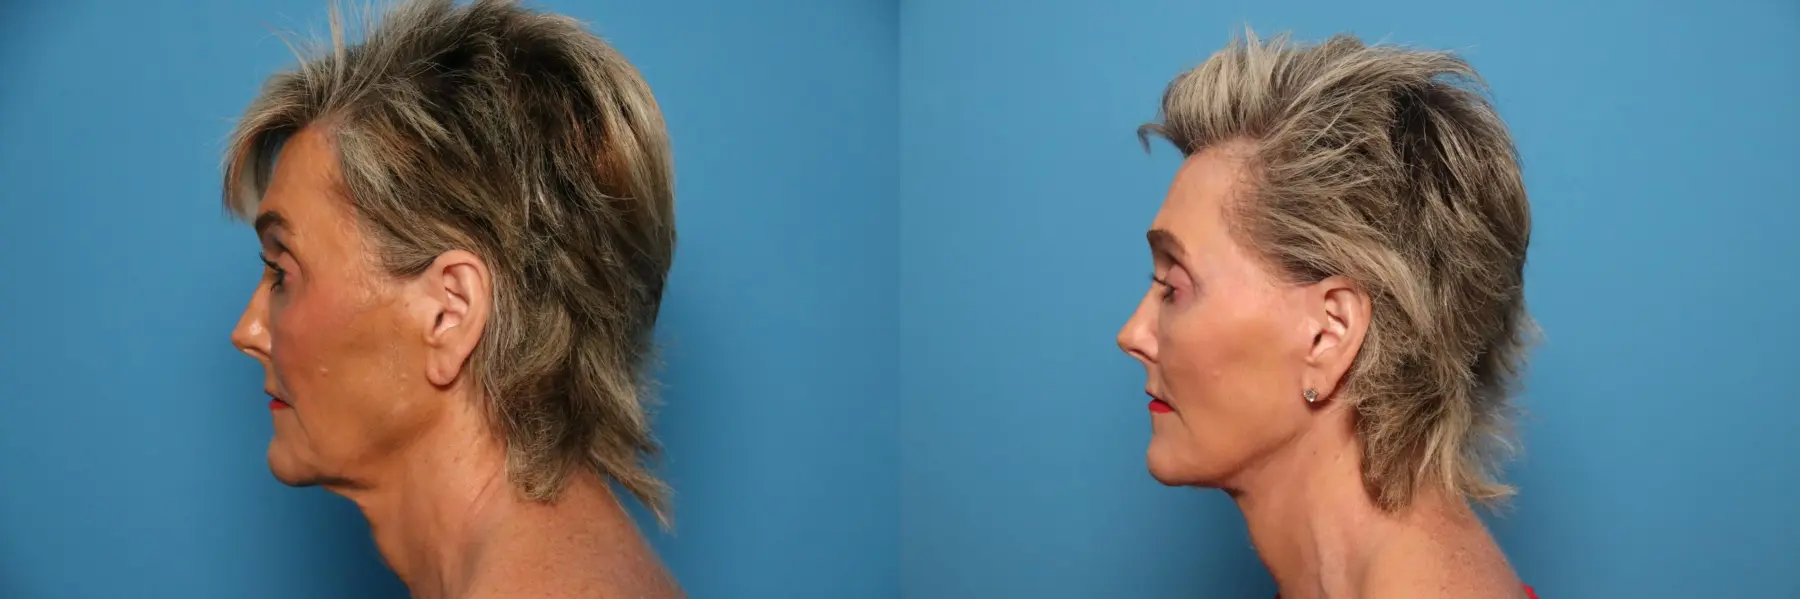 Facelift/Mini Facelift: Patient 6 - Before and After 3